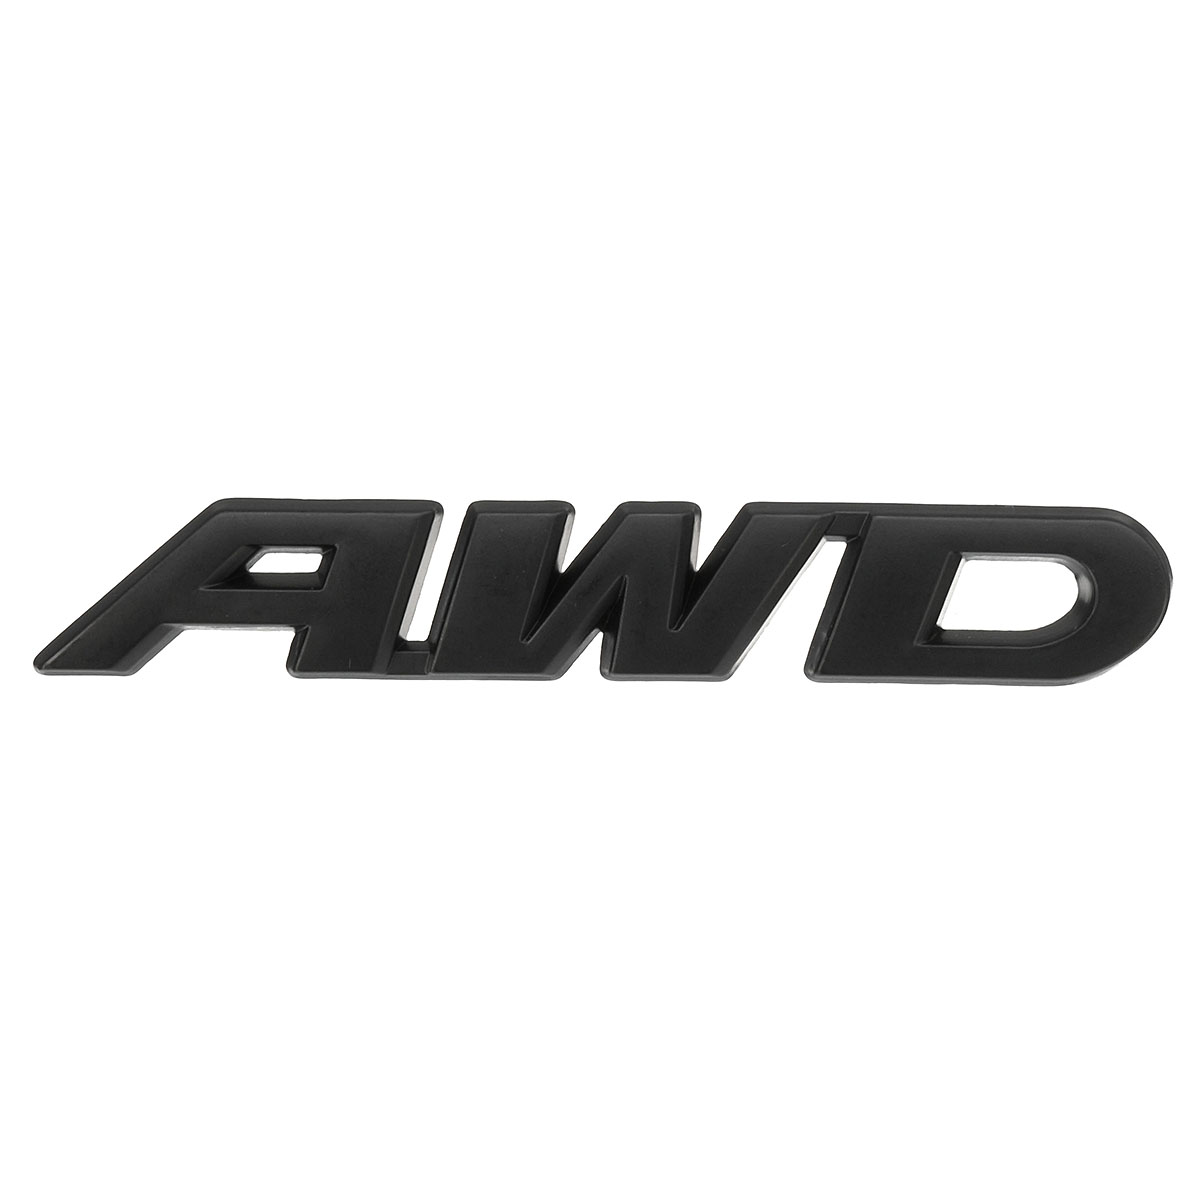 

AWD 3D Badge Rear Tail Stickers Black Emblem for 4 Wheel Drive SUV Offroad Car